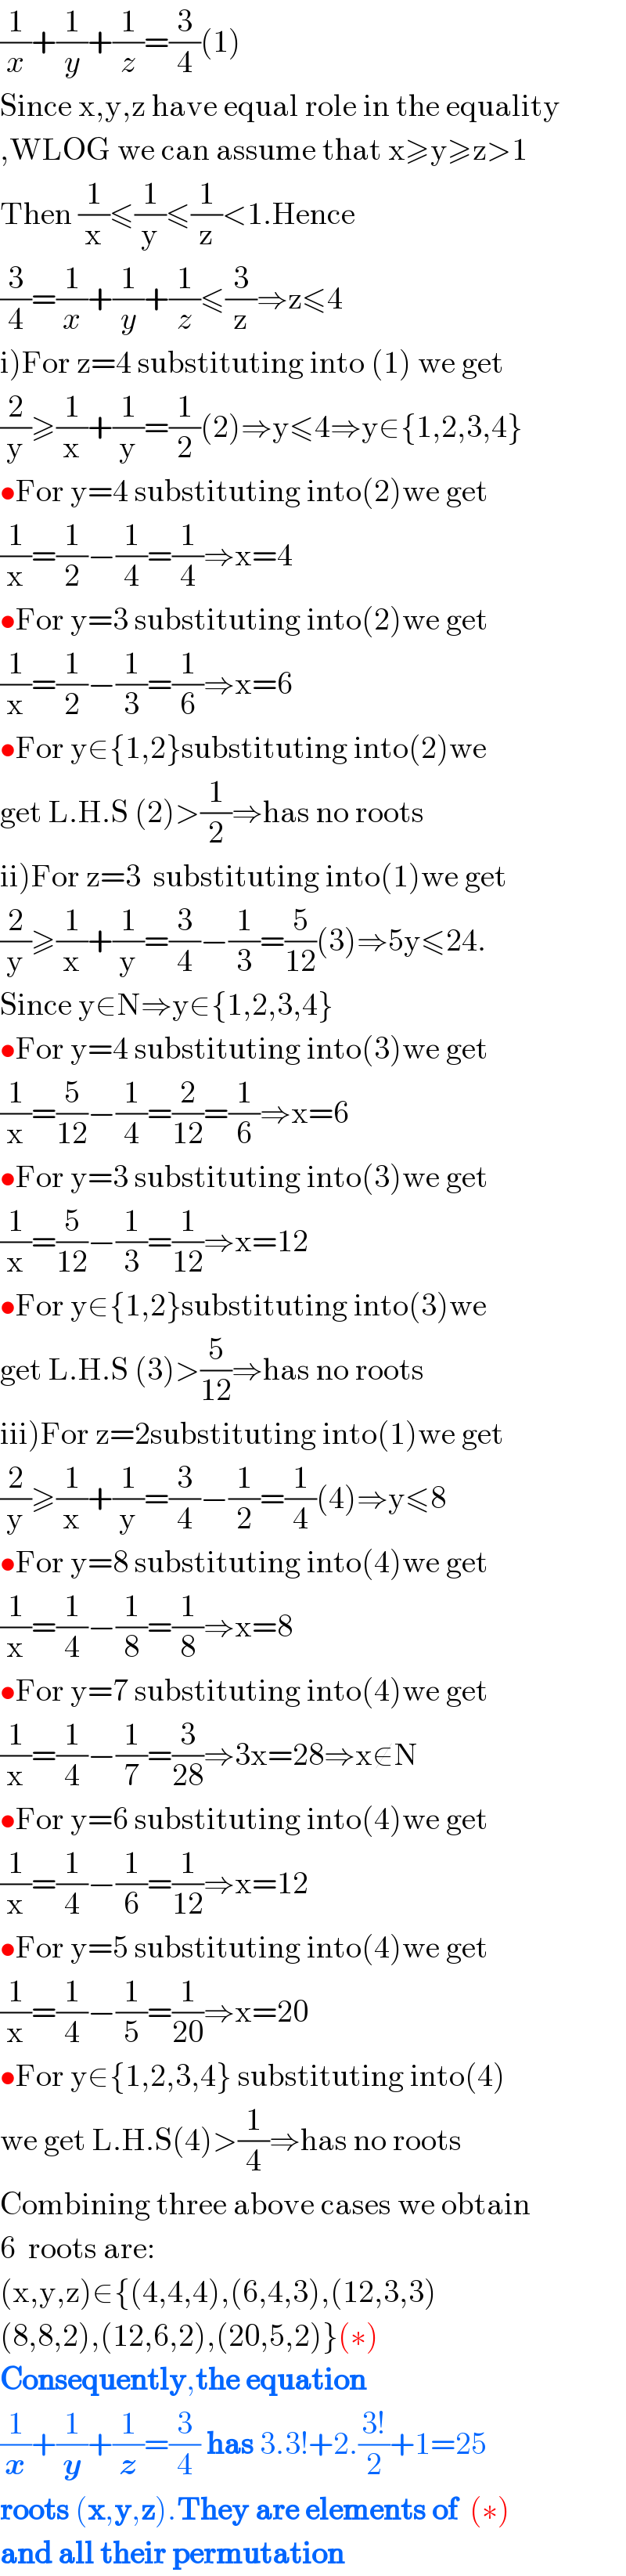 (1/x)+(1/y)+(1/z)=(3/4)(1)  Since x,y,z have equal role in the equality  ,WLOG we can assume that x≥y≥z>1  Then (1/x)≤(1/y)≤(1/z)<1.Hence  (3/4)=(1/x)+(1/y)+(1/z)≤(3/z)⇒z≤4  i)For z=4 substituting into (1) we get  (2/y)≥(1/x)+(1/y)=(1/2)(2)⇒y≤4⇒y∈{1,2,3,4}  •For y=4 substituting into(2)we get  (1/x)=(1/2)−(1/4)=(1/4)⇒x=4  •For y=3 substituting into(2)we get  (1/x)=(1/2)−(1/3)=(1/6)⇒x=6  •For y∈{1,2}substituting into(2)we   get L.H.S (2)>(1/2)⇒has no roots  ii)For z=3  substituting into(1)we get  (2/y)≥(1/x)+(1/y)=(3/4)−(1/3)=(5/(12))(3)⇒5y≤24.  Since y∈N⇒y∈{1,2,3,4}  •For y=4 substituting into(3)we get  (1/x)=(5/(12))−(1/4)=(2/(12))=(1/6)⇒x=6  •For y=3 substituting into(3)we get  (1/x)=(5/(12))−(1/3)=(1/(12))⇒x=12  •For y∈{1,2}substituting into(3)we  get L.H.S (3)>(5/(12))⇒has no roots  iii)For z=2substituting into(1)we get  (2/y)≥(1/x)+(1/y)=(3/4)−(1/2)=(1/4)(4)⇒y≤8  •For y=8 substituting into(4)we get  (1/x)=(1/4)−(1/8)=(1/8)⇒x=8  •For y=7 substituting into(4)we get  (1/x)=(1/4)−(1/7)=(3/(28))⇒3x=28⇒x∉N   •For y=6 substituting into(4)we get  (1/x)=(1/4)−(1/6)=(1/(12))⇒x=12  •For y=5 substituting into(4)we get  (1/x)=(1/4)−(1/5)=(1/(20))⇒x=20  •For y∈{1,2,3,4} substituting into(4)  we get L.H.S(4)>(1/4)⇒has no roots  Combining three above cases we obtain  6  roots are:  (x,y,z)∈{(4,4,4),(6,4,3),(12,3,3)  (8,8,2),(12,6,2),(20,5,2)}(∗)  Consequently,the equation    (1/x)+(1/y)+(1/z)=(3/4) has 3.3!+2.((3!)/2)+1=25   roots (x,y,z).They are elements of  (∗)  and all their permutation  